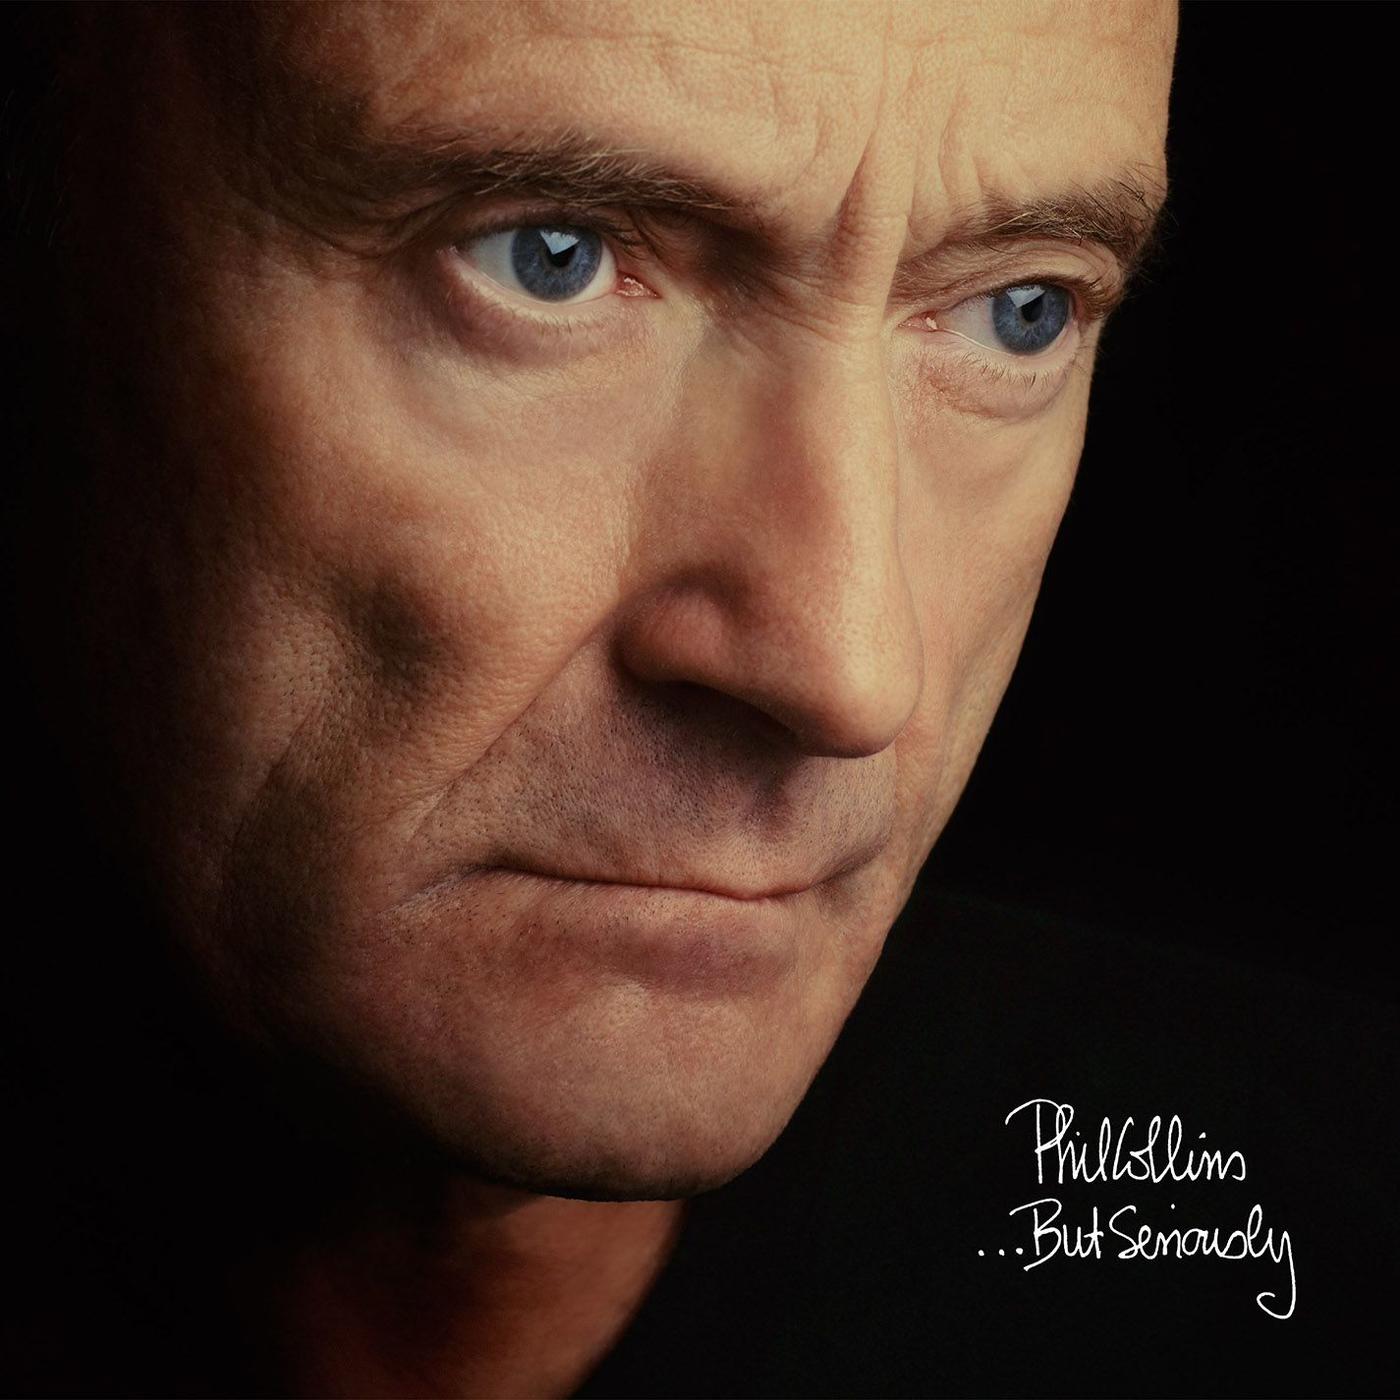 Happy Anniversary: Phil Collins, “Another Day in Paradise”